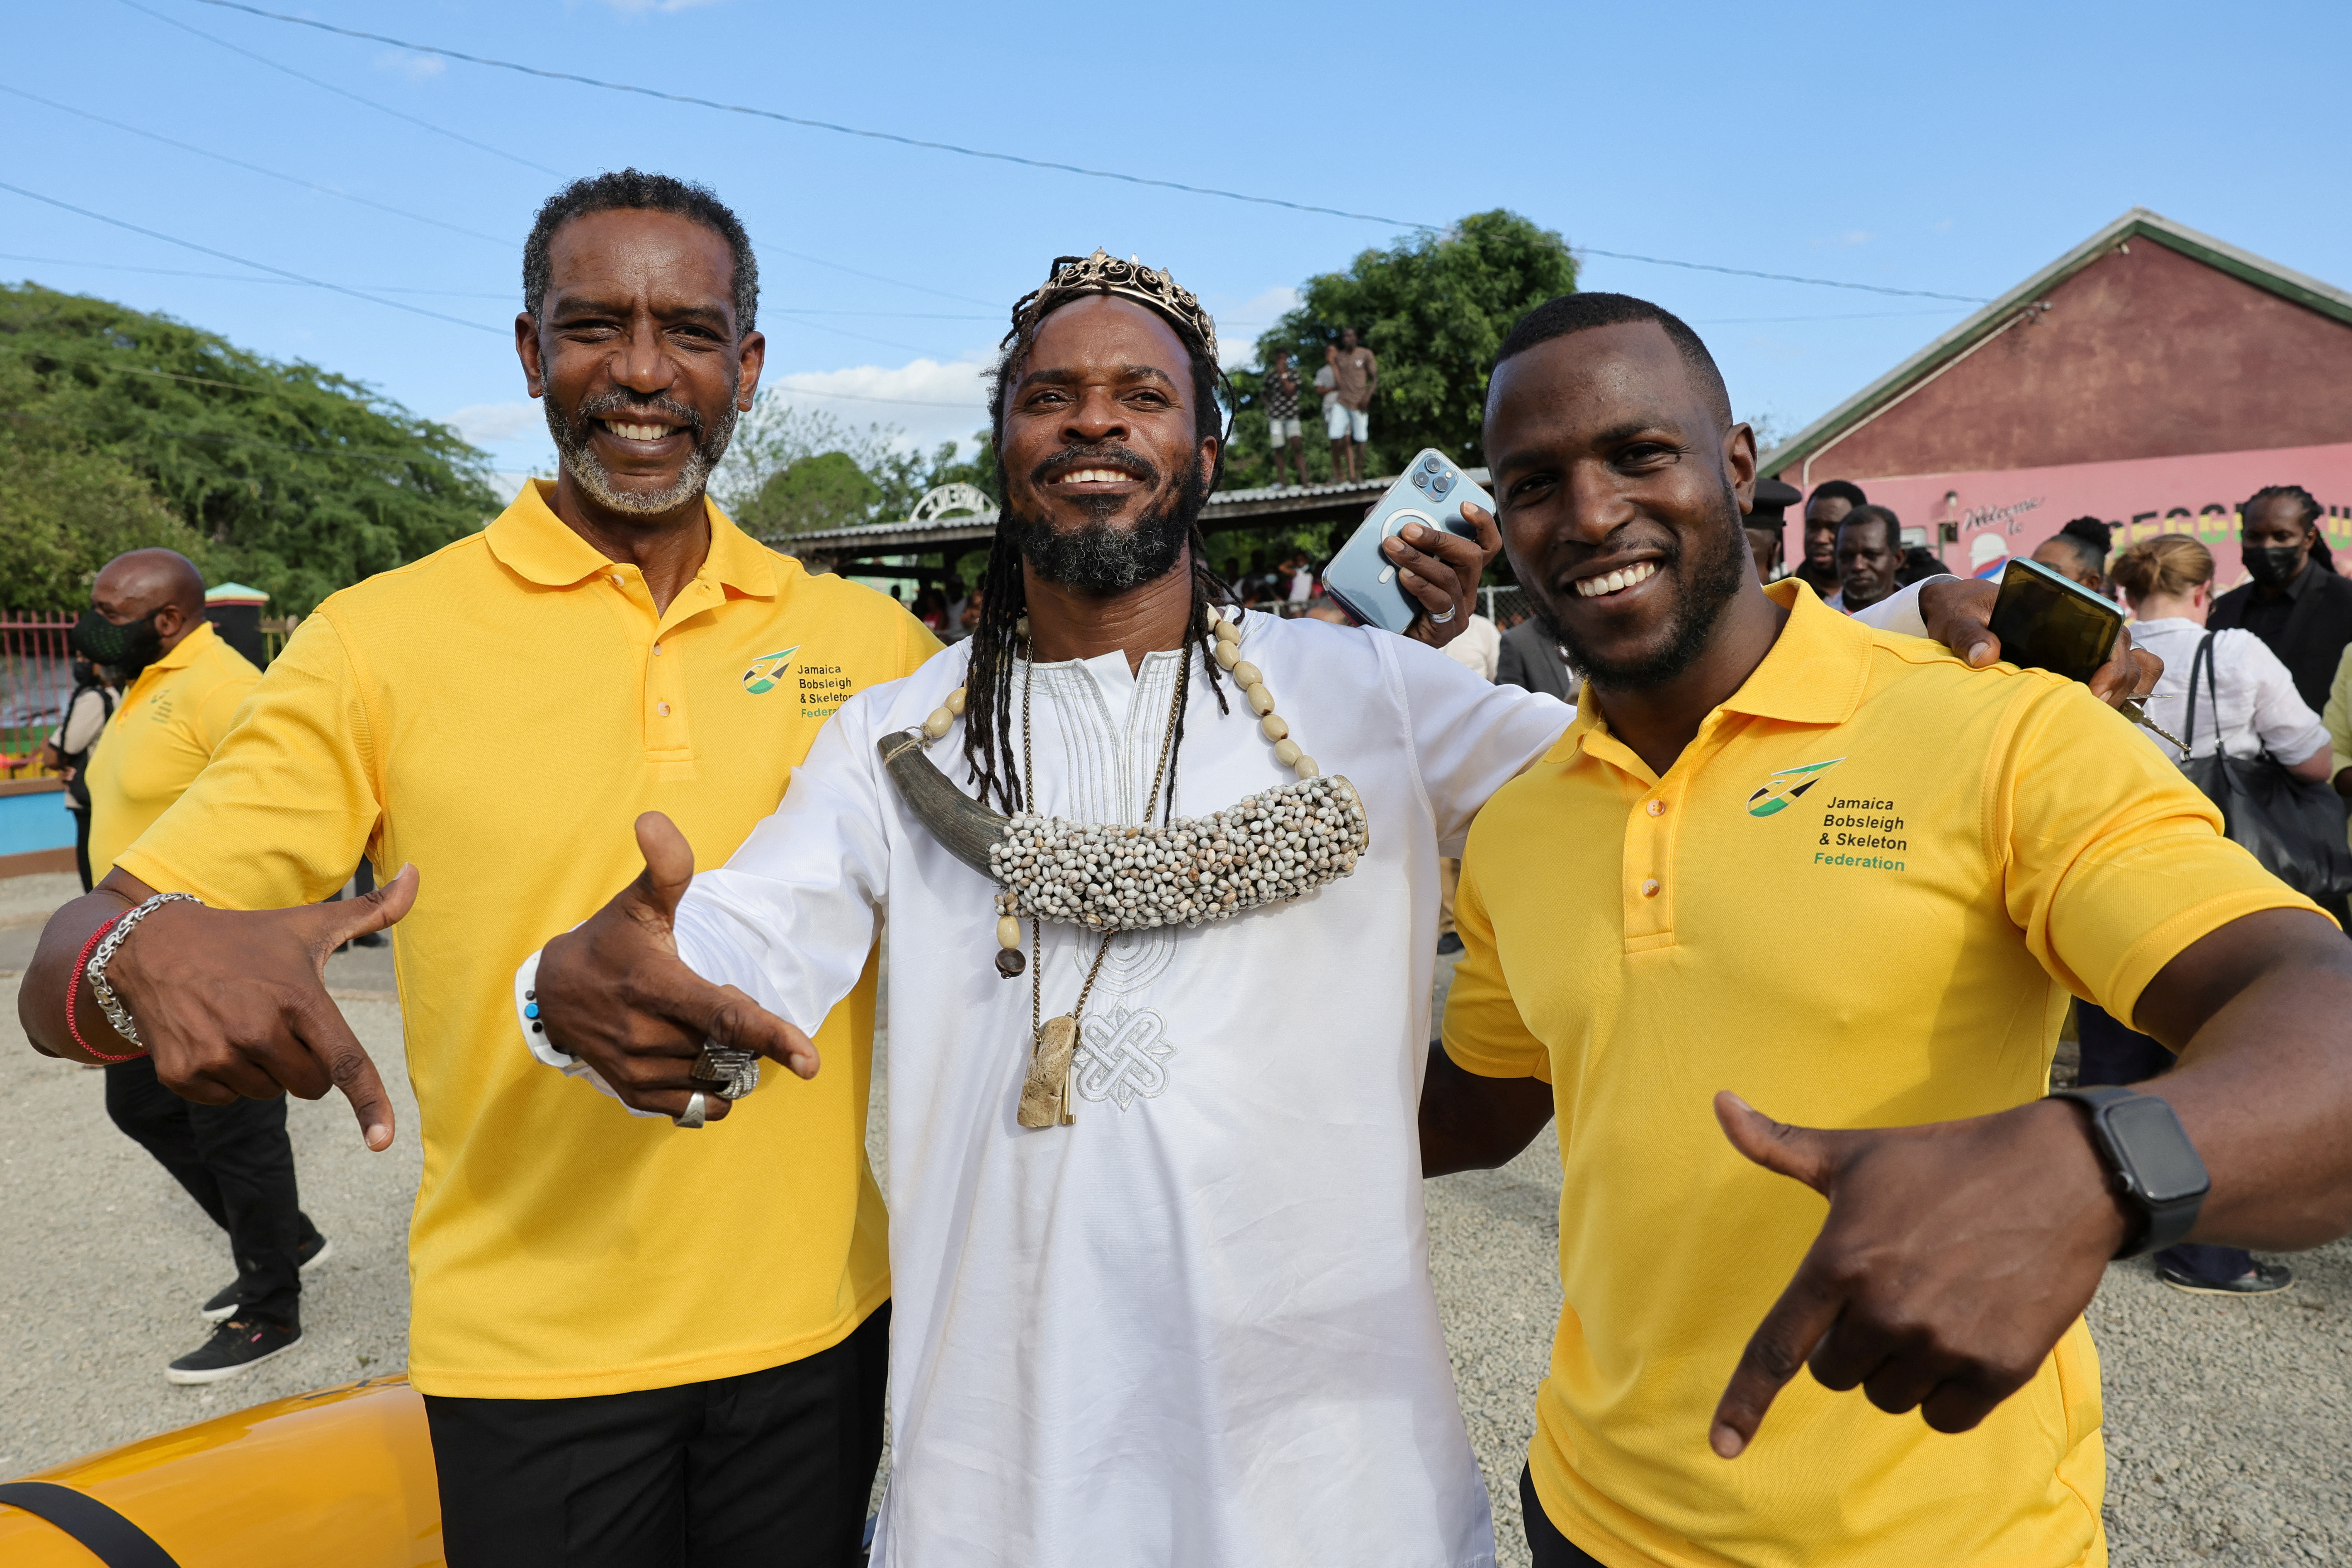 Members of Jamaica's National bobsleigh team Chris Stokes and Rolando Reid visit Trench Town, the birthplace of reggae music, on the fourth day of the Platinum Jubilee Royal Tour of the Caribbean by Prince William and Catherine, Duchess of Cambridge, in Kingston, Jamaica March 22, 2022. Chris Jackson/Pool via REUTERS